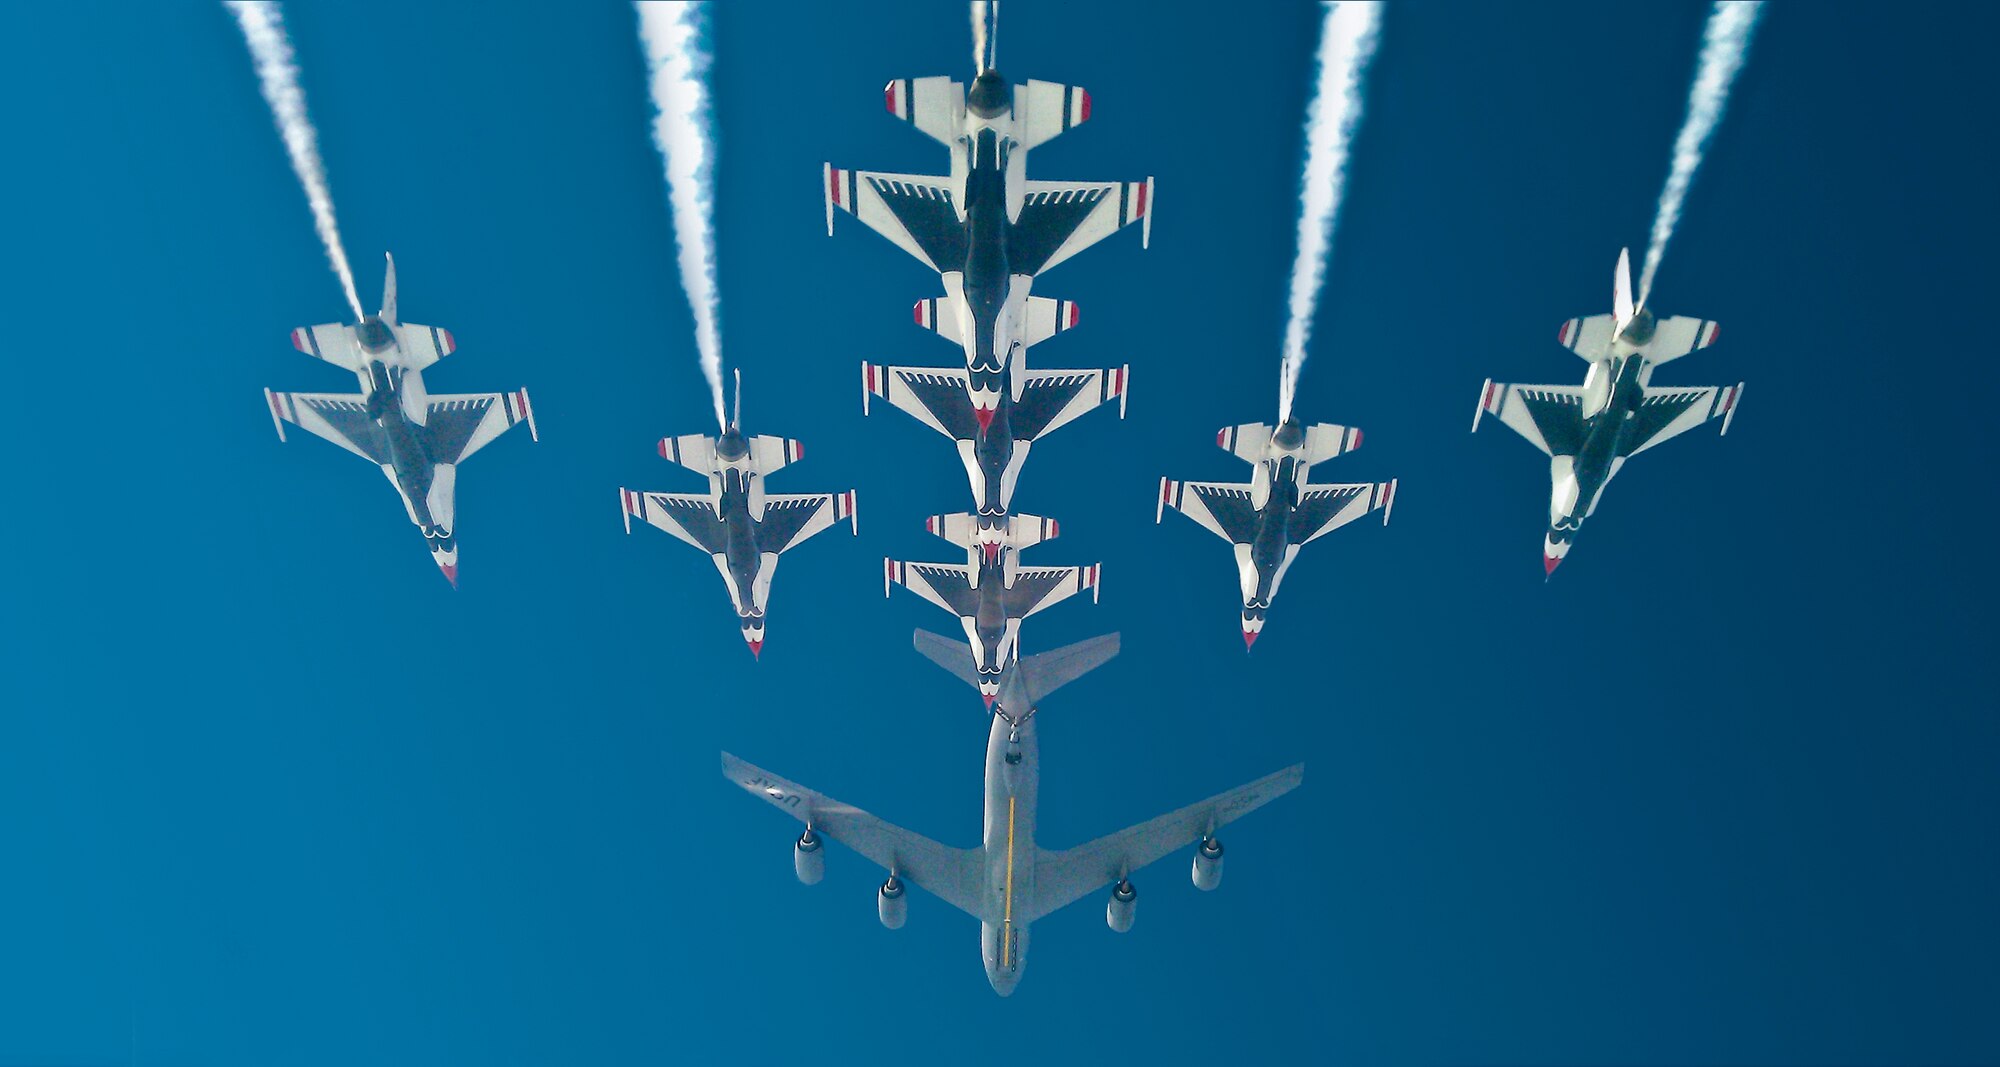 The U.S. Air Force Thunderbirds aerial demonstration team flies in formation behind a Fairchild Air Force Base KC-135r prior to refueling Aug. 8, 2012. The Thunderbirds have operated since 1953 as the USAF "ambassadors in blue" and have demonstrated the Air Force's flying capability across the world. (Courtesy Photo)